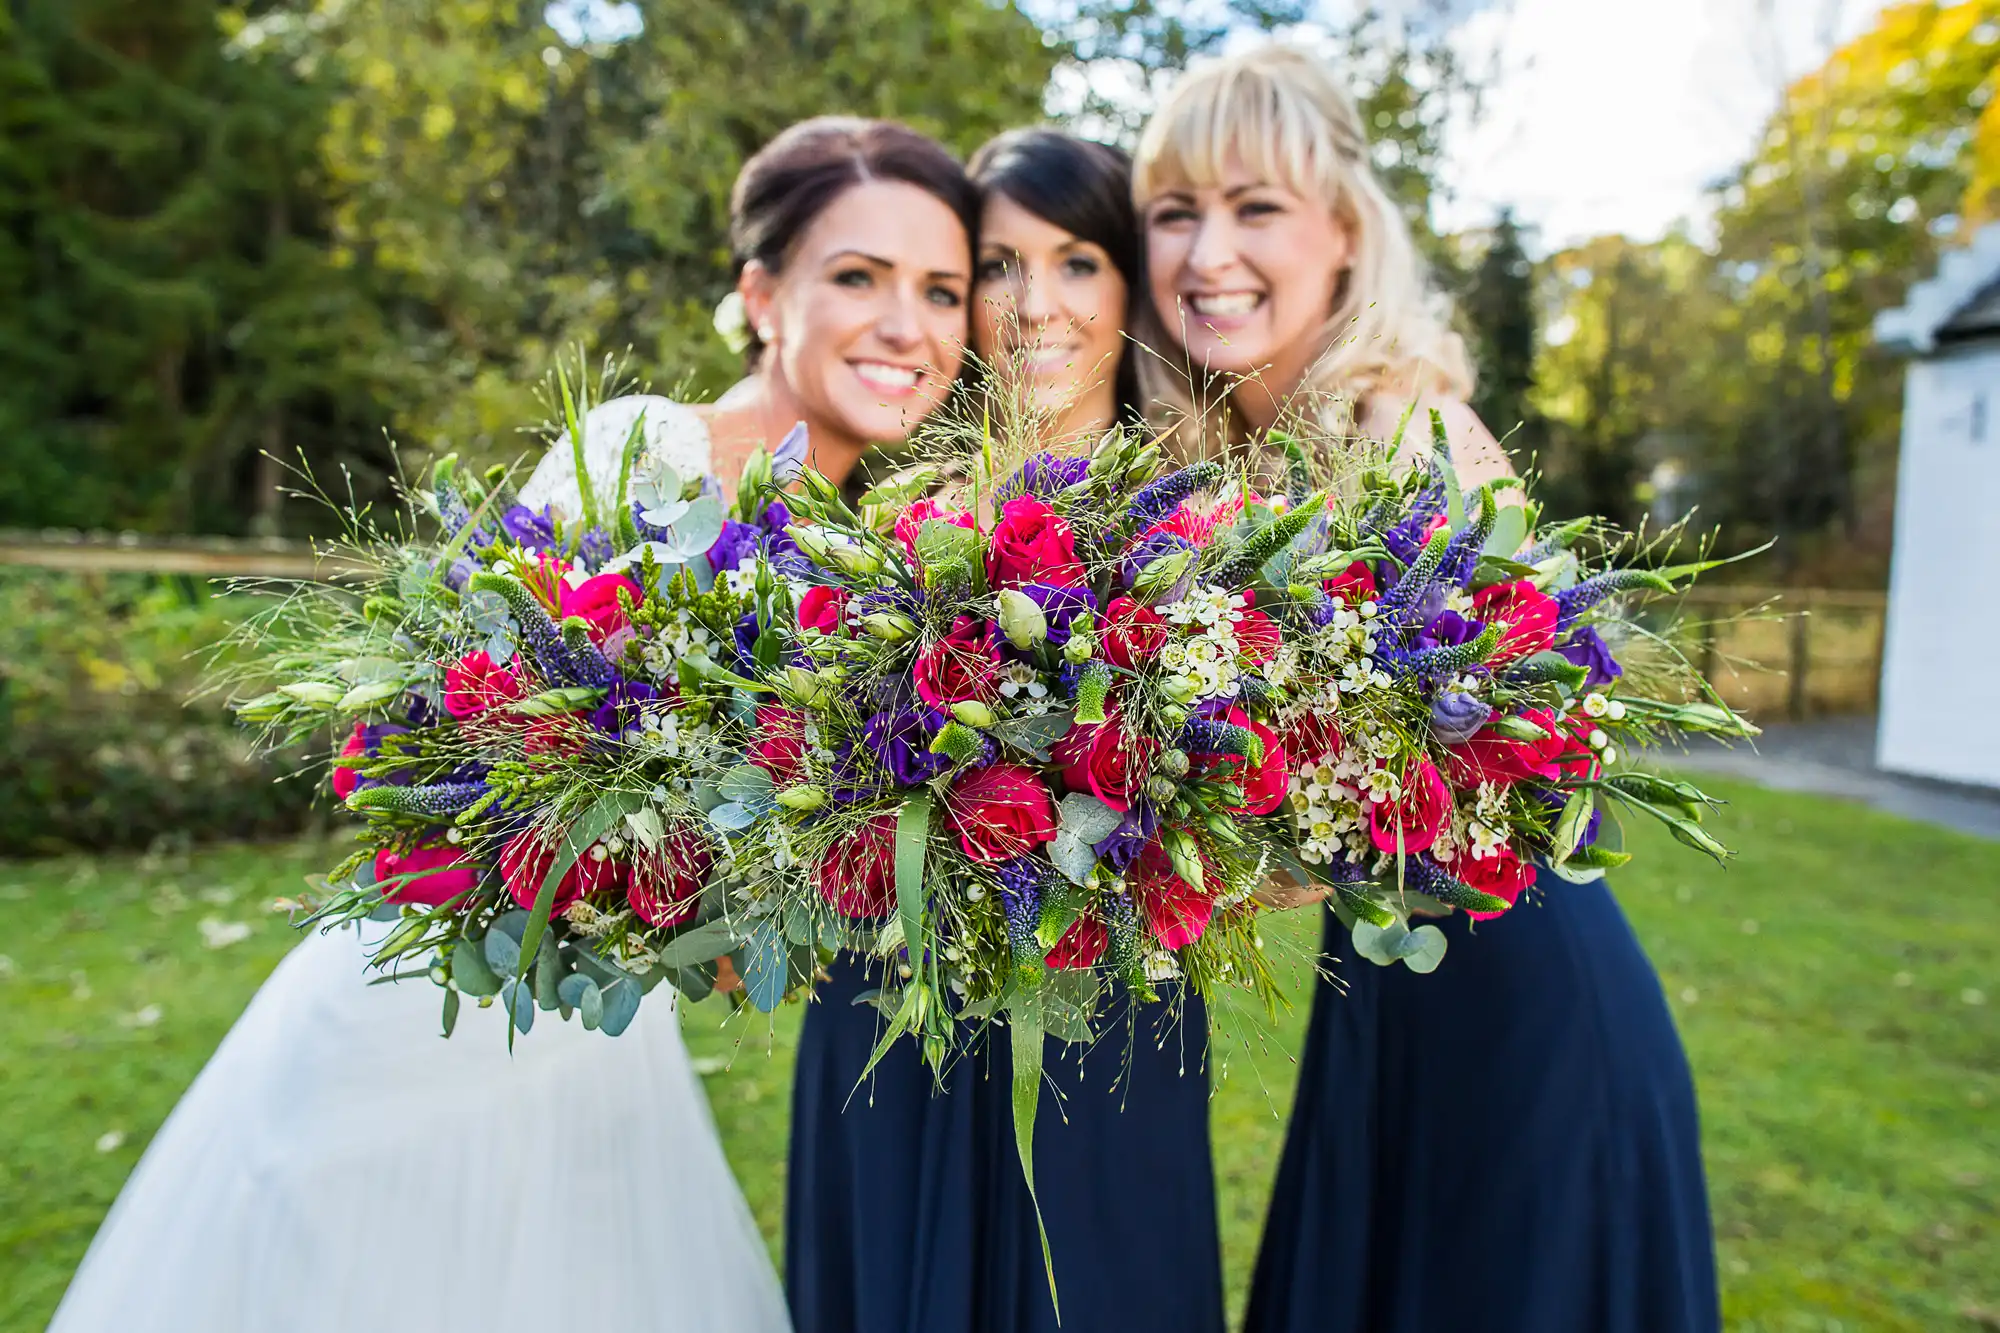 Three smiling women at a wedding, one in a white dress holding a large, colorful floral bouquet, flanked by two in blue dresses.